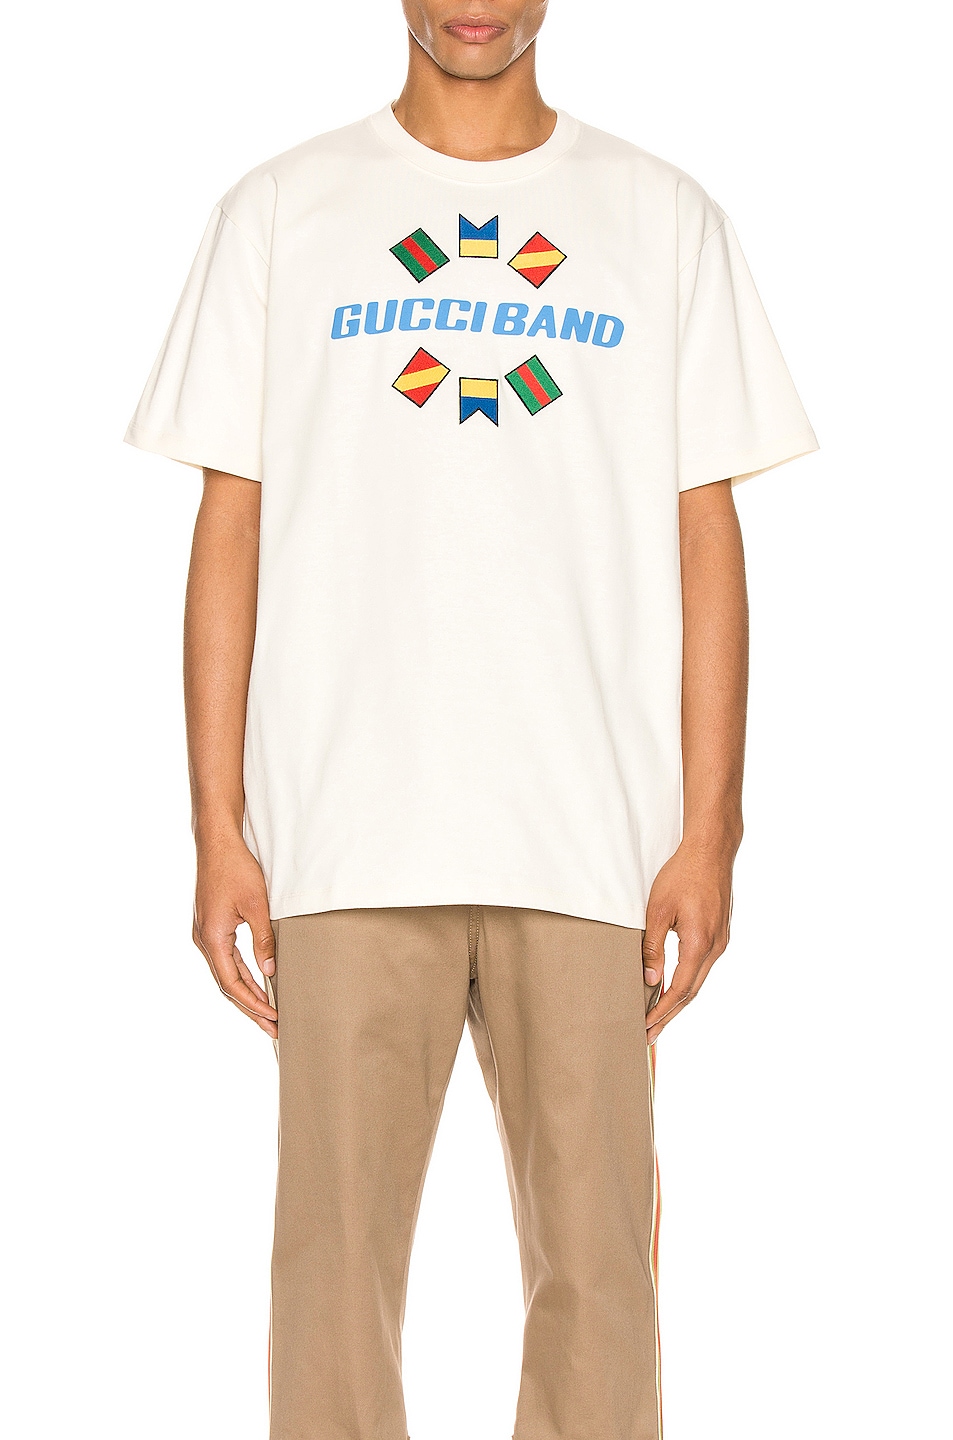 Image 1 of Gucci Band Oversize Print Tee in Sunkissed & MC